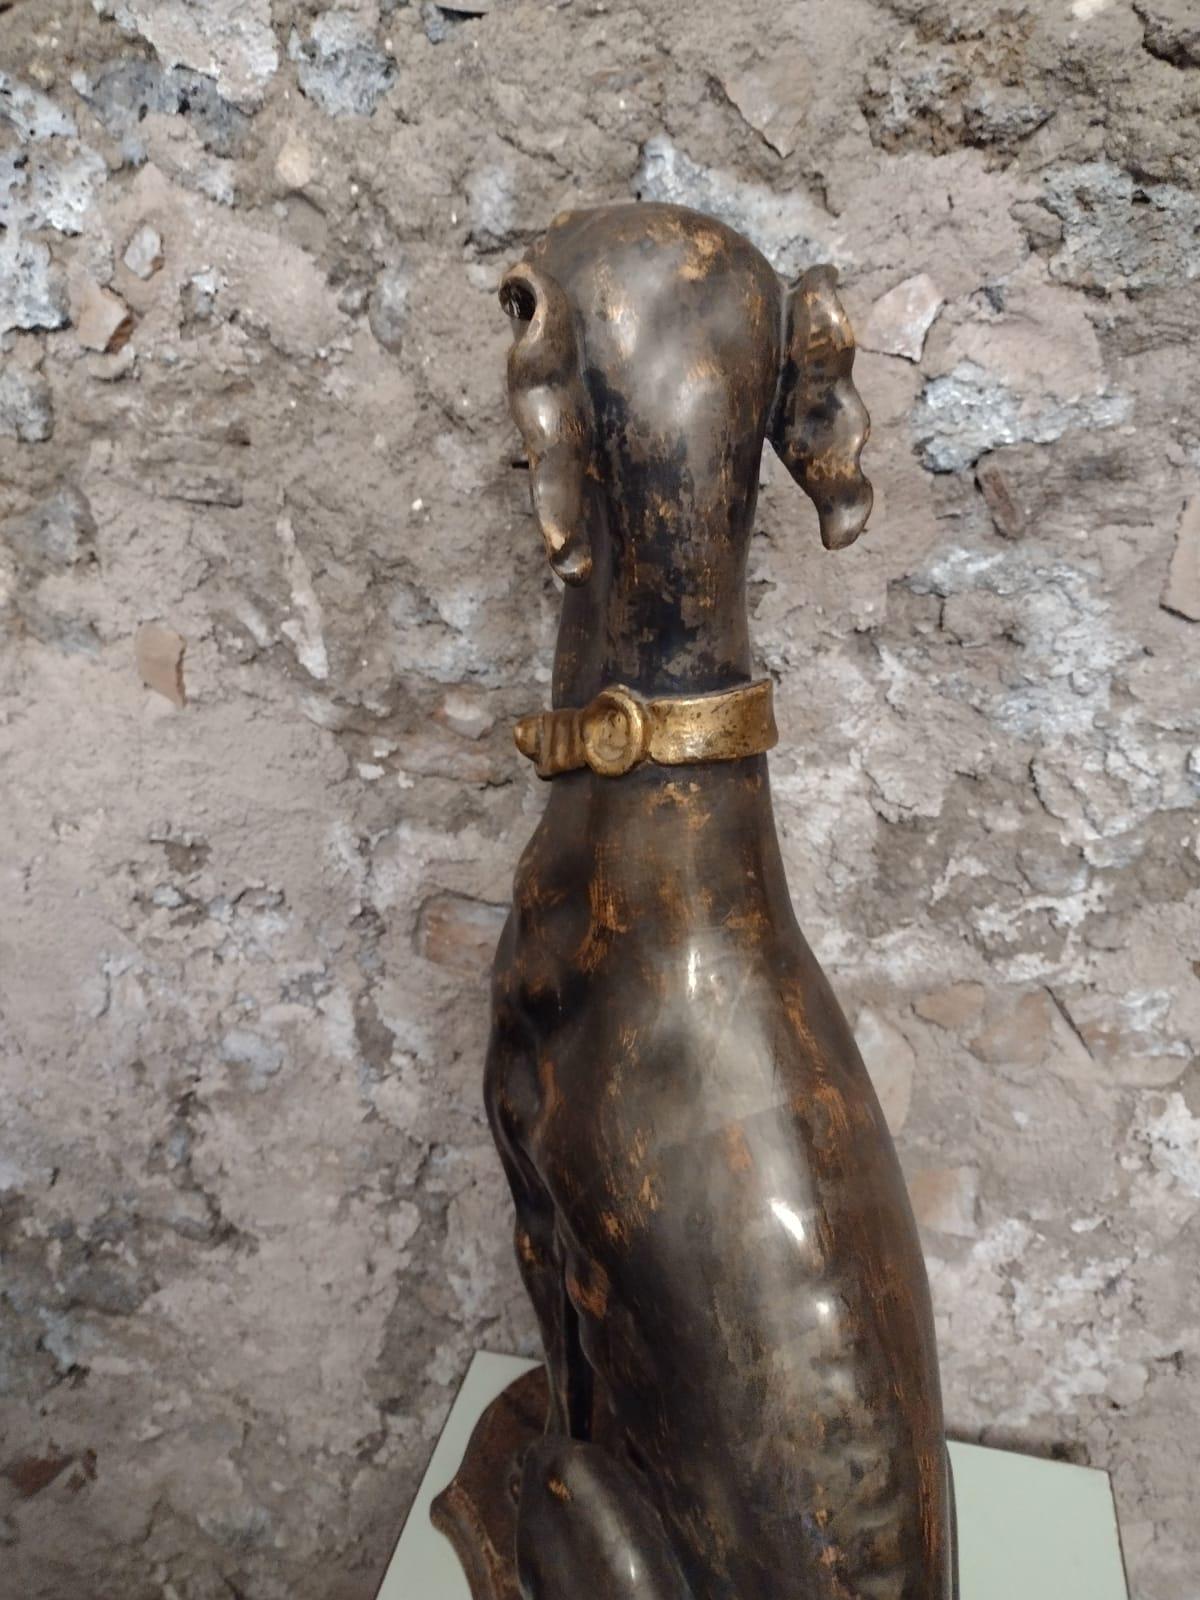 The dog is in gilt  carved wood  We believe to be an Italian greyhound sitting on its haunch. It has a gold buckled dog collar around the neck. The dog attached to cartouche shaped base that shows traces of the original paint.